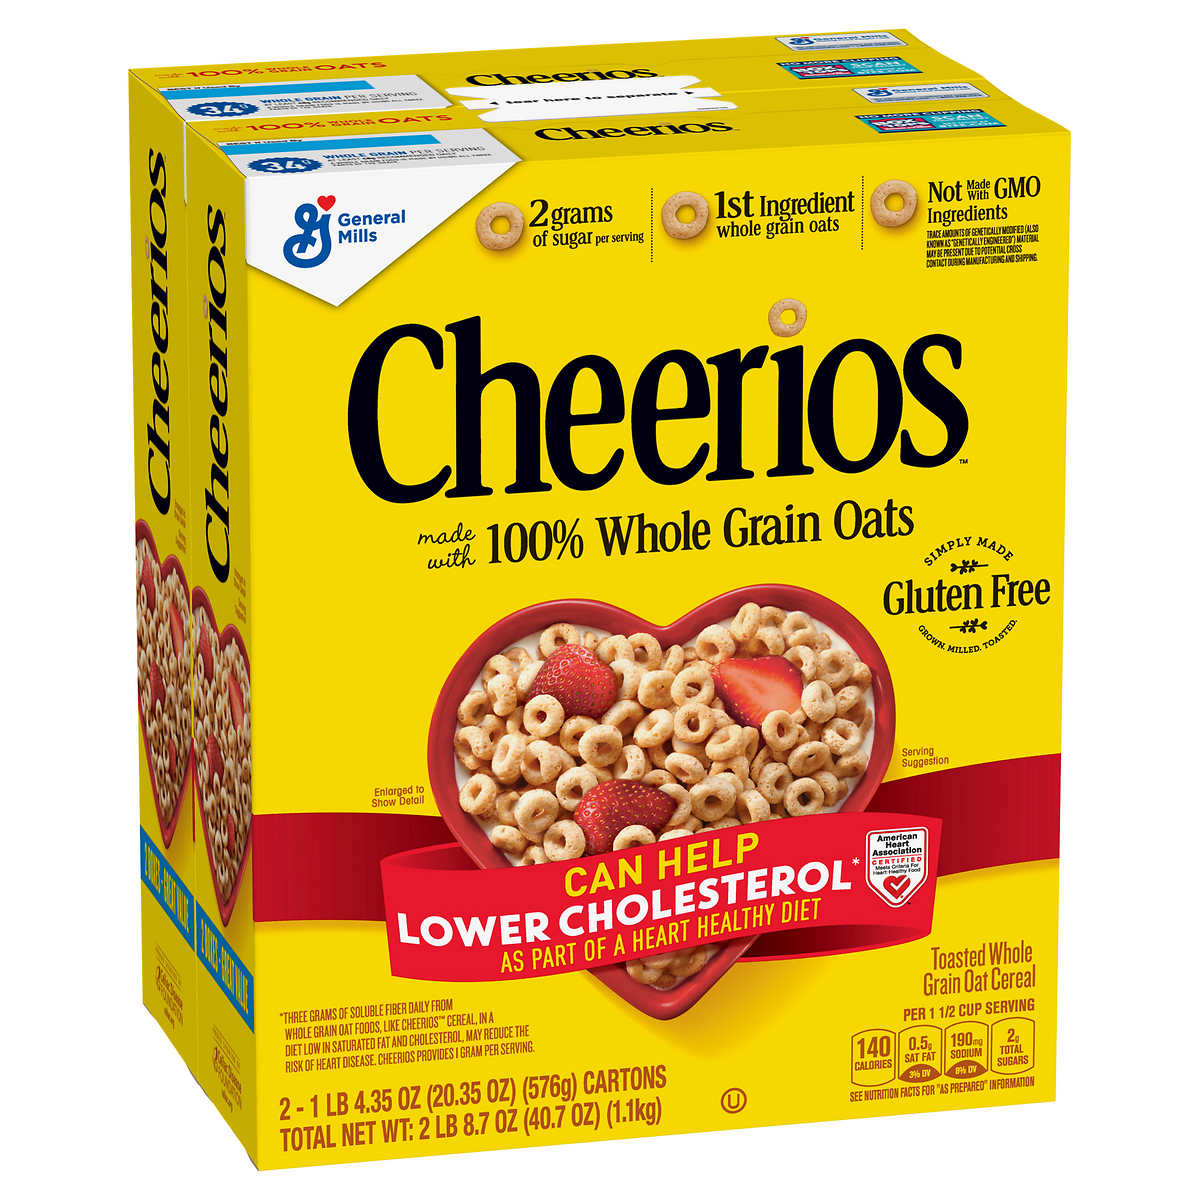 Cheerios morgenmad i to poser. 1.2 kg. 
Cheerios Cereal, 20.35 oz, 2-count